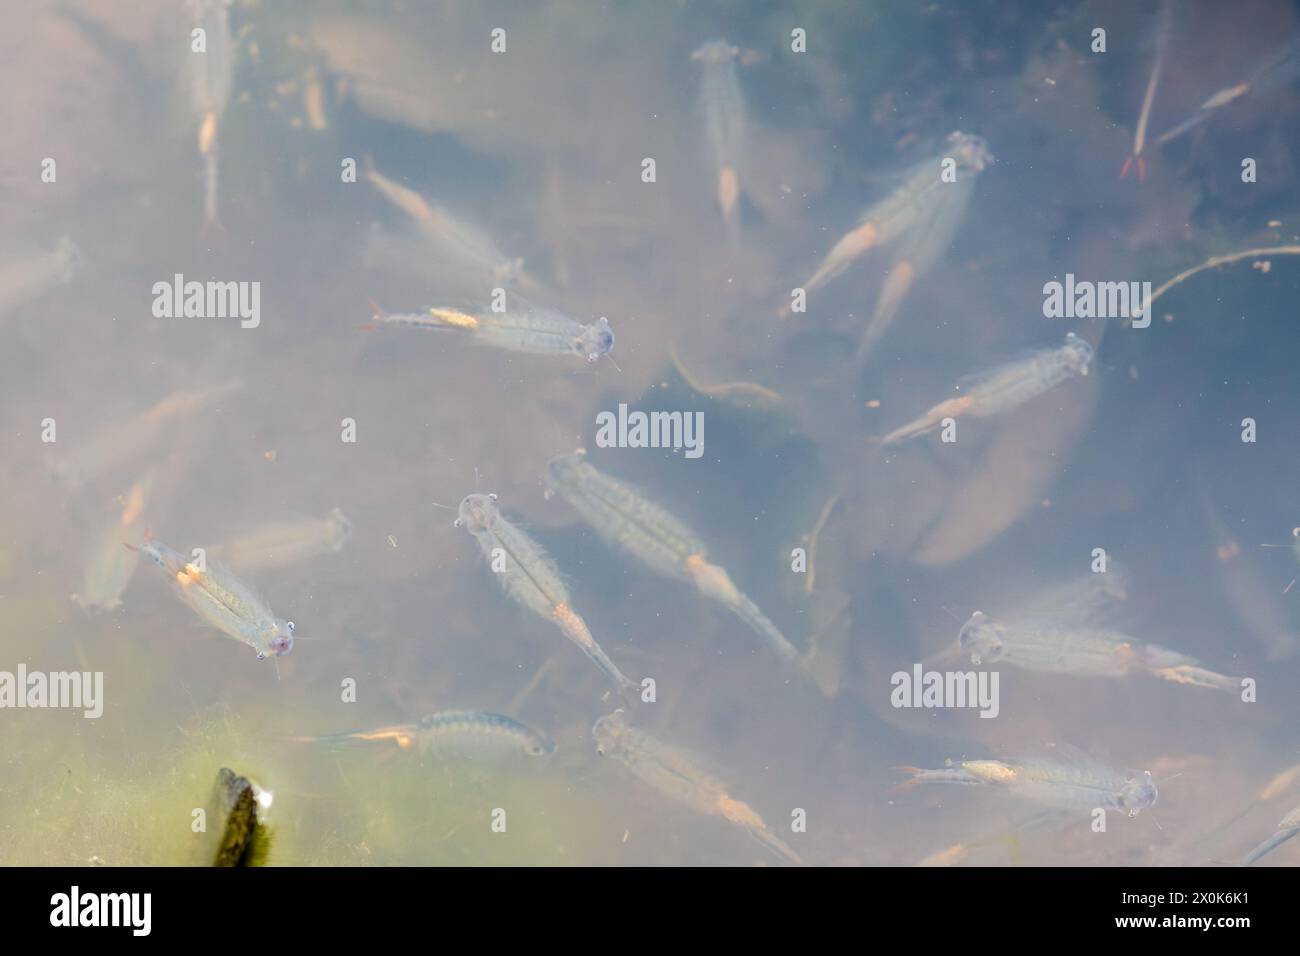 Fairy shrimp shrimps (Chirocephalus diaphanus) in a puddle in Hampshire, England, UK, during April or spring Stock Photo